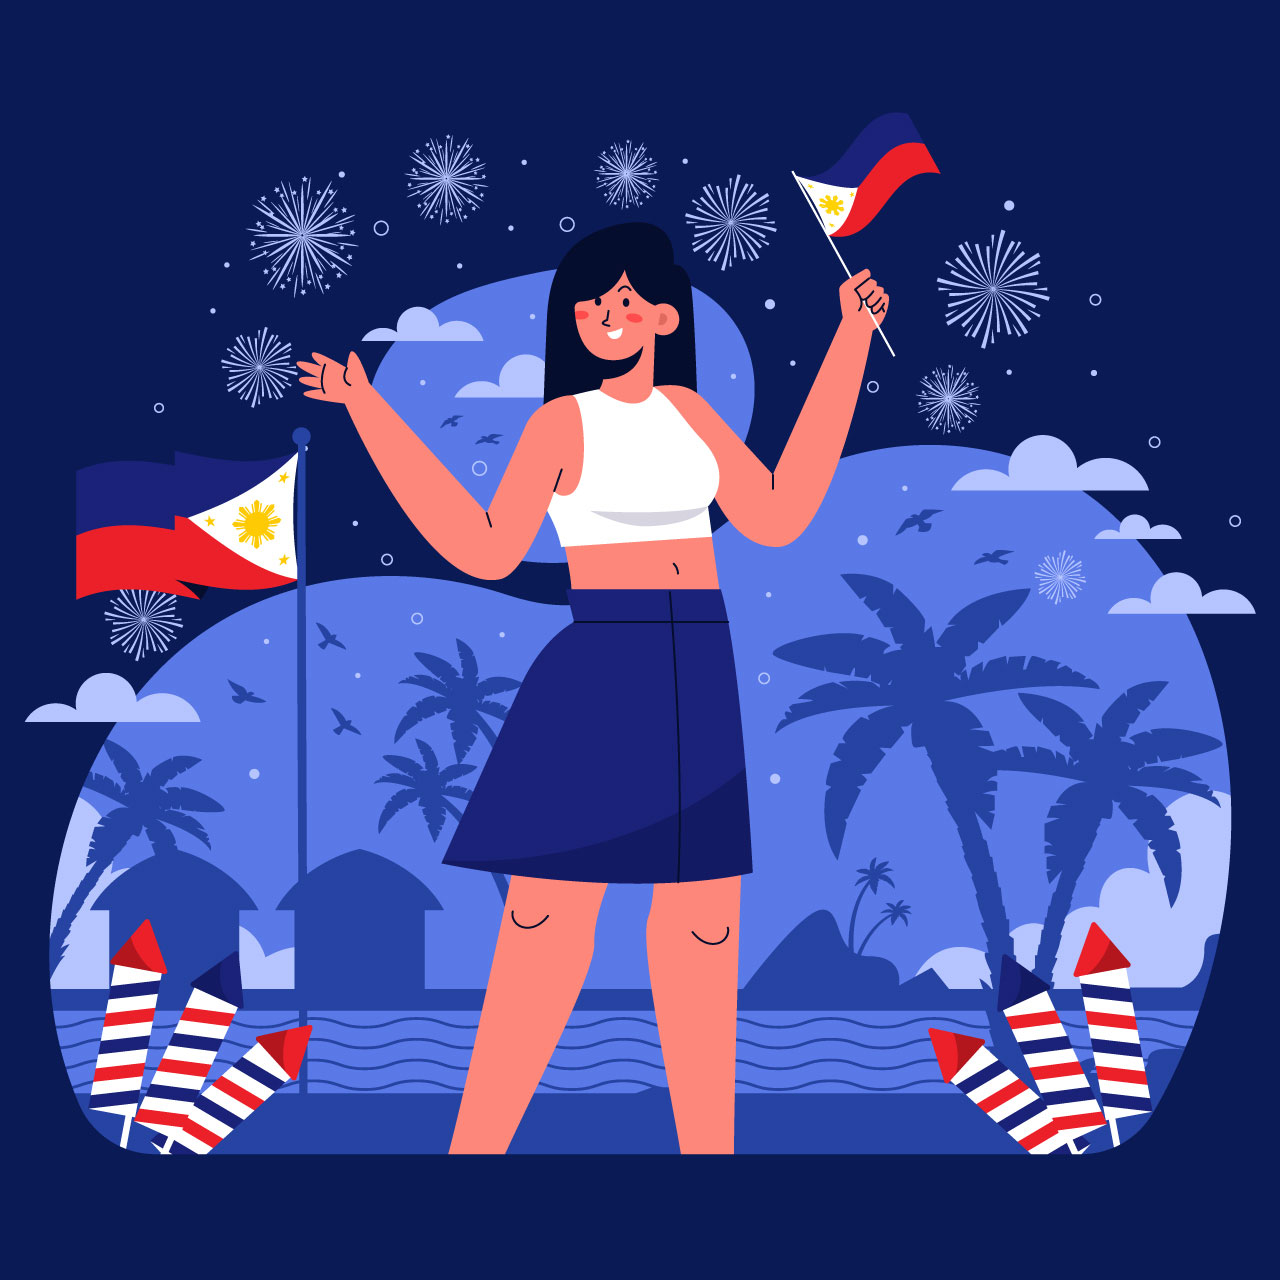 Flat philippine independence day illustration with girl holding flag